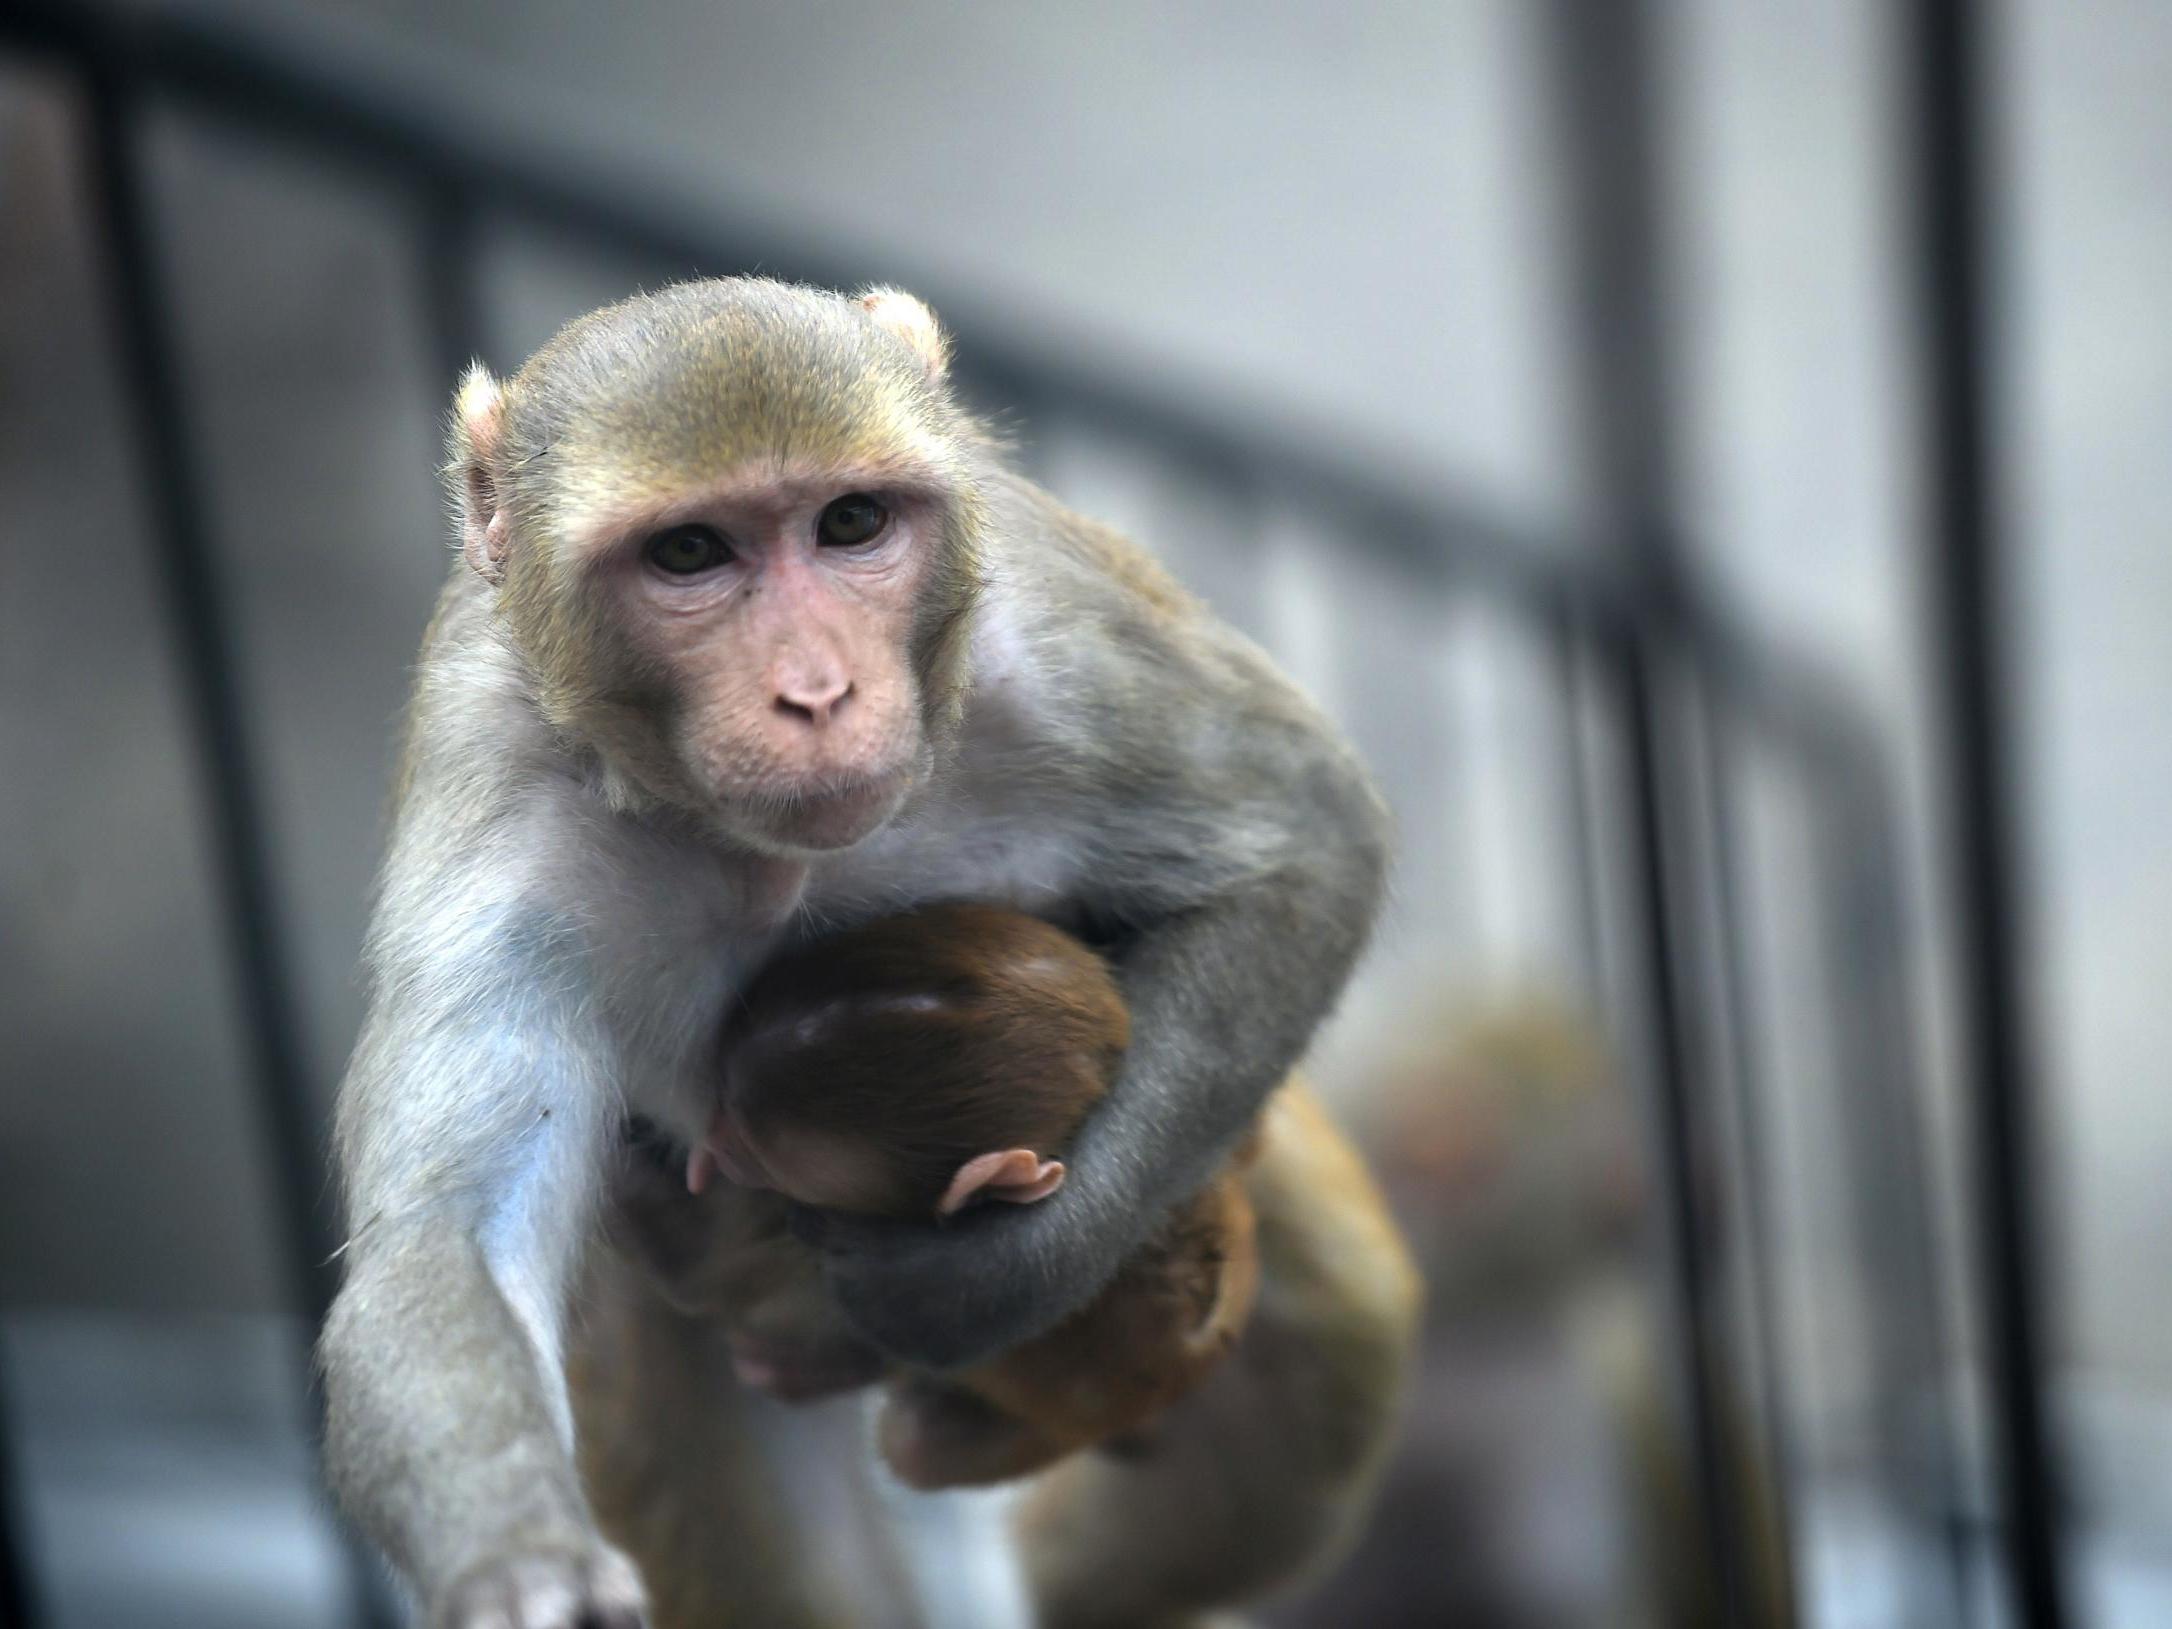 World’s first humanmonkey hybrid created in China, scientists reveal